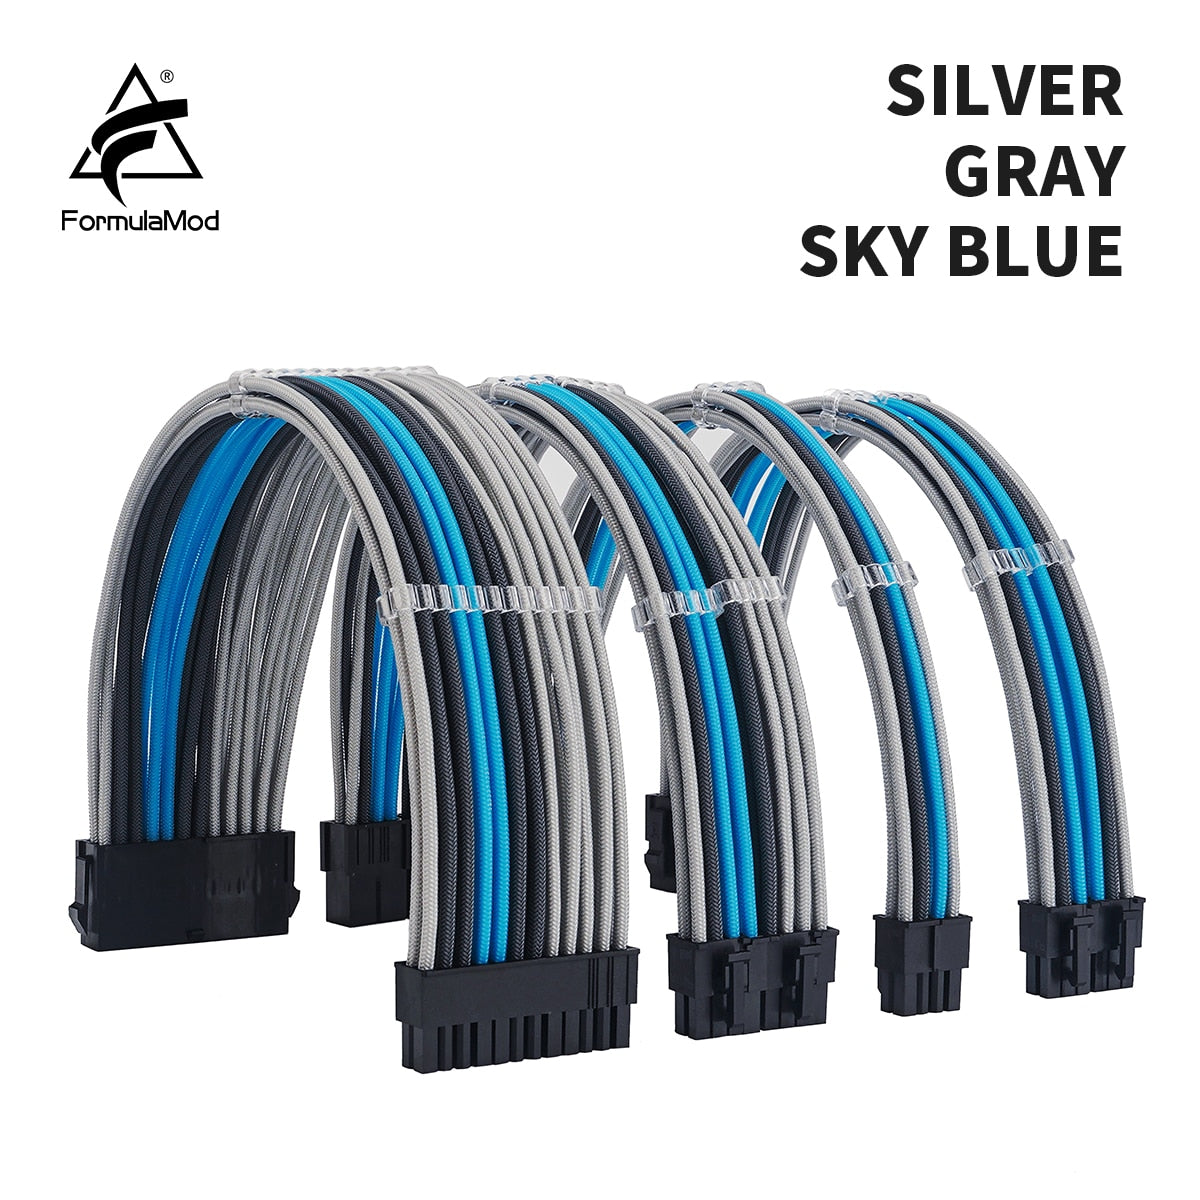 FormulaMod NCK3 Series PSU Extension Cable Kit , Solid Color Cable Mix Combo 300mm ATX24Pin PCI-E8Pin CPU8Pin With Combs